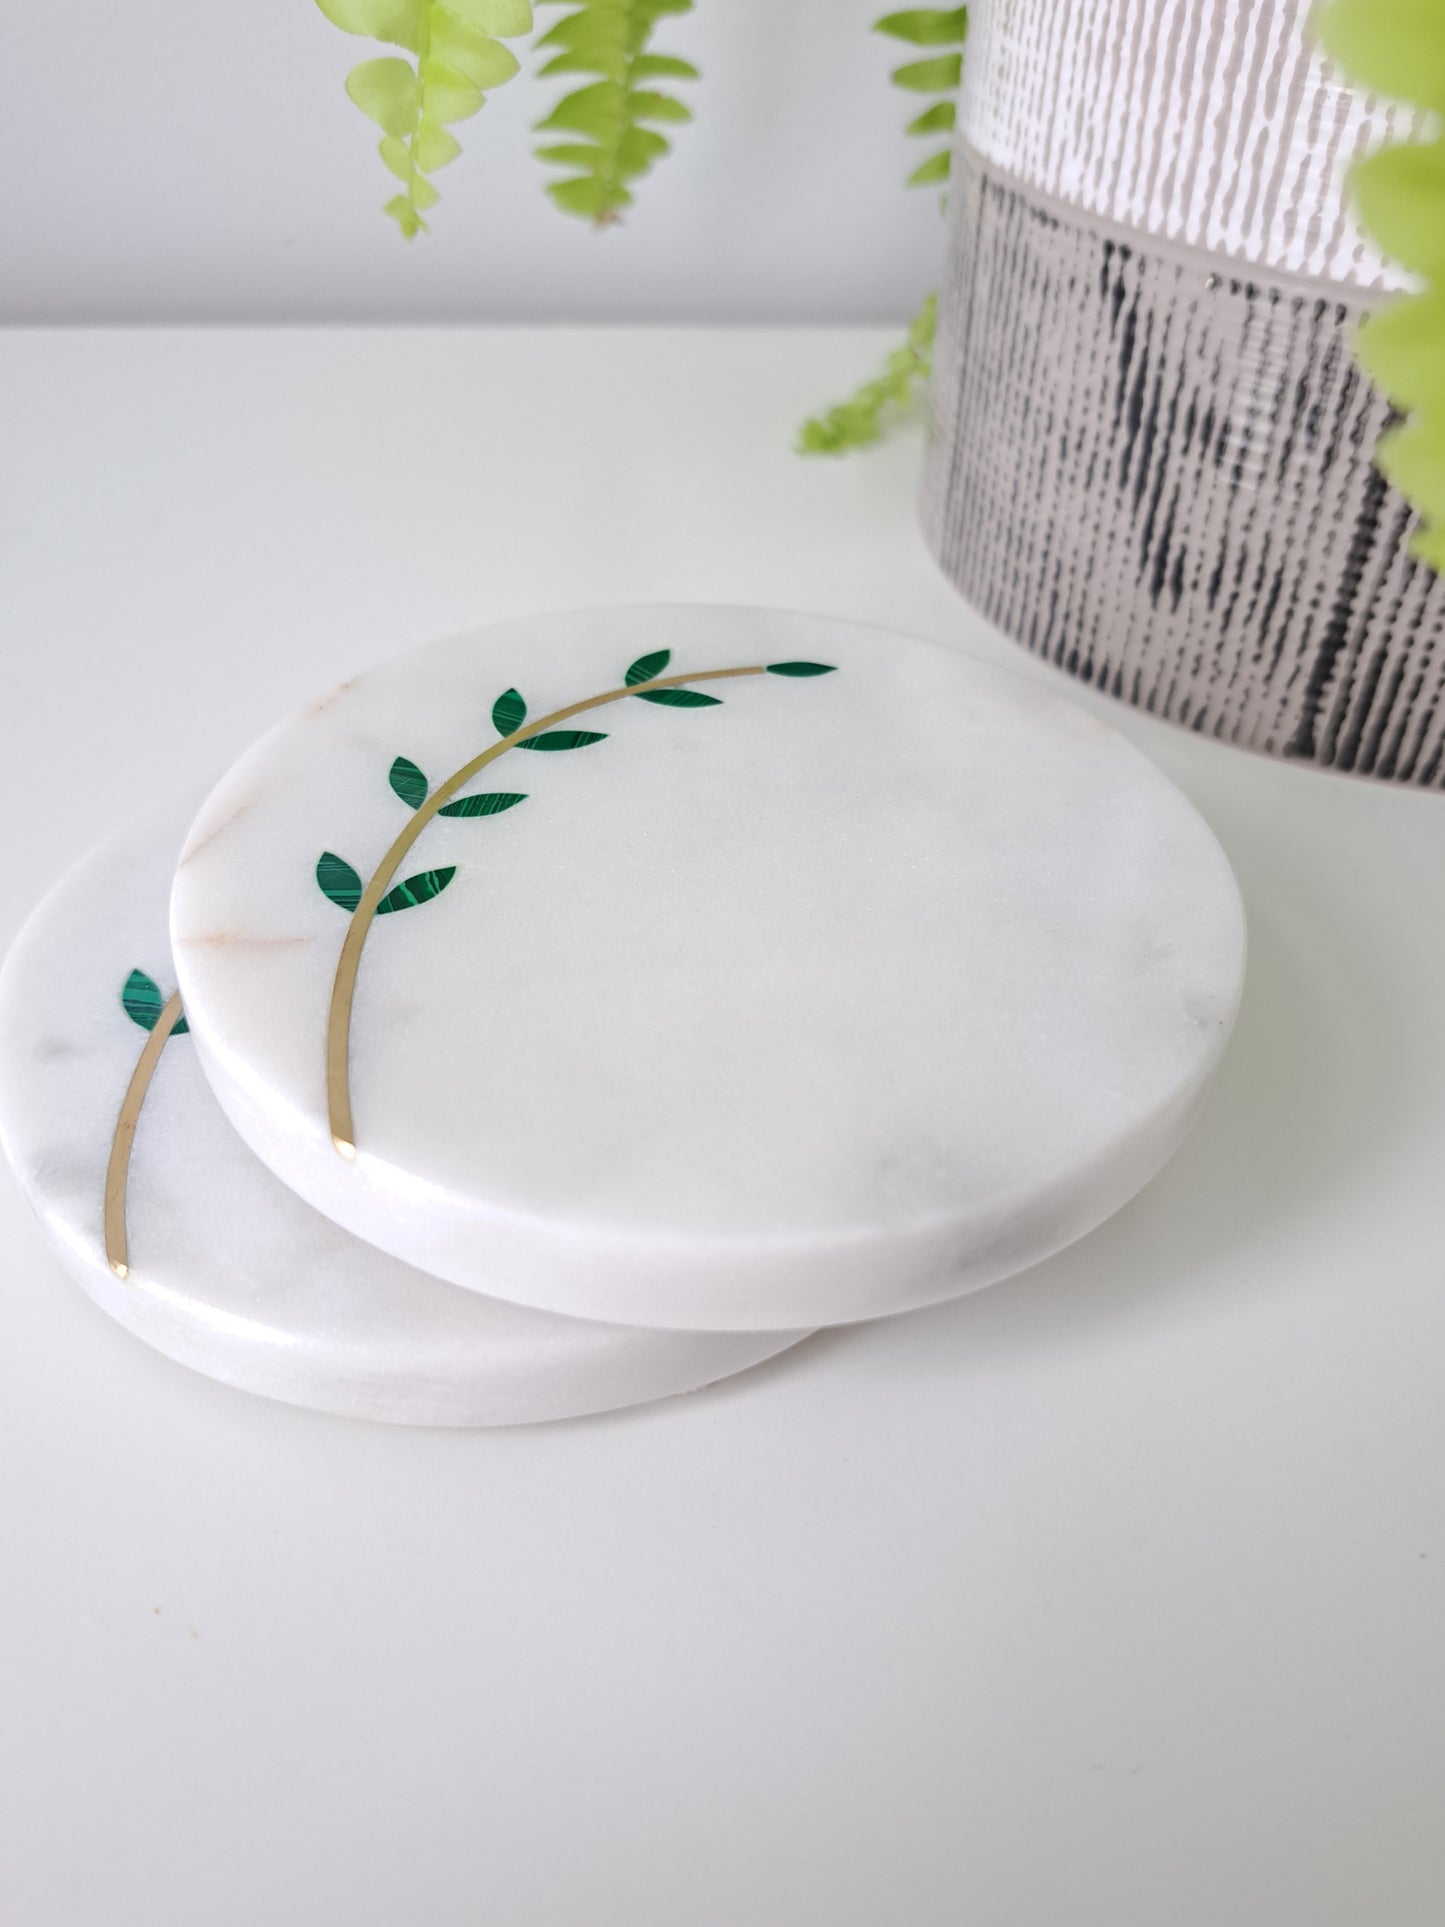 Hand-cut, artisan crafted olive branch coasters. Minimal yet stunning, these coasters made of white marble with brass inlay are sure to impress. Beautiful for a farmhouse, Mediterranean, or contemporary space.